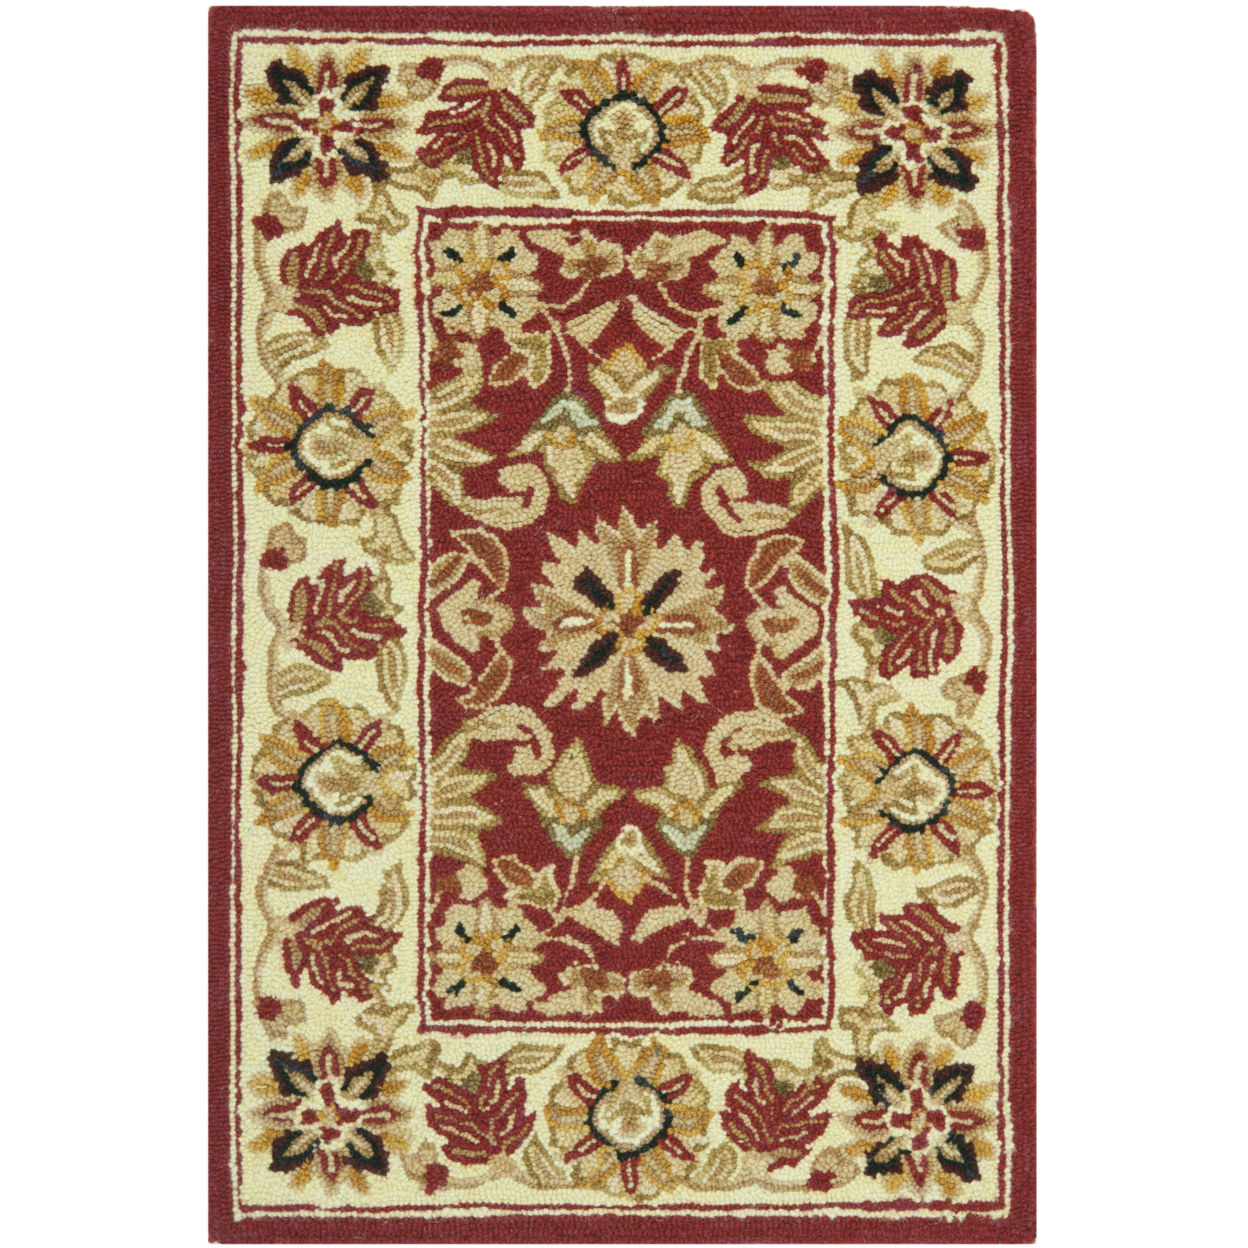 SAFAVIEH Chelsea HK157A Hand-hooked Red / Ivory Rug - 2' 6 X 8'